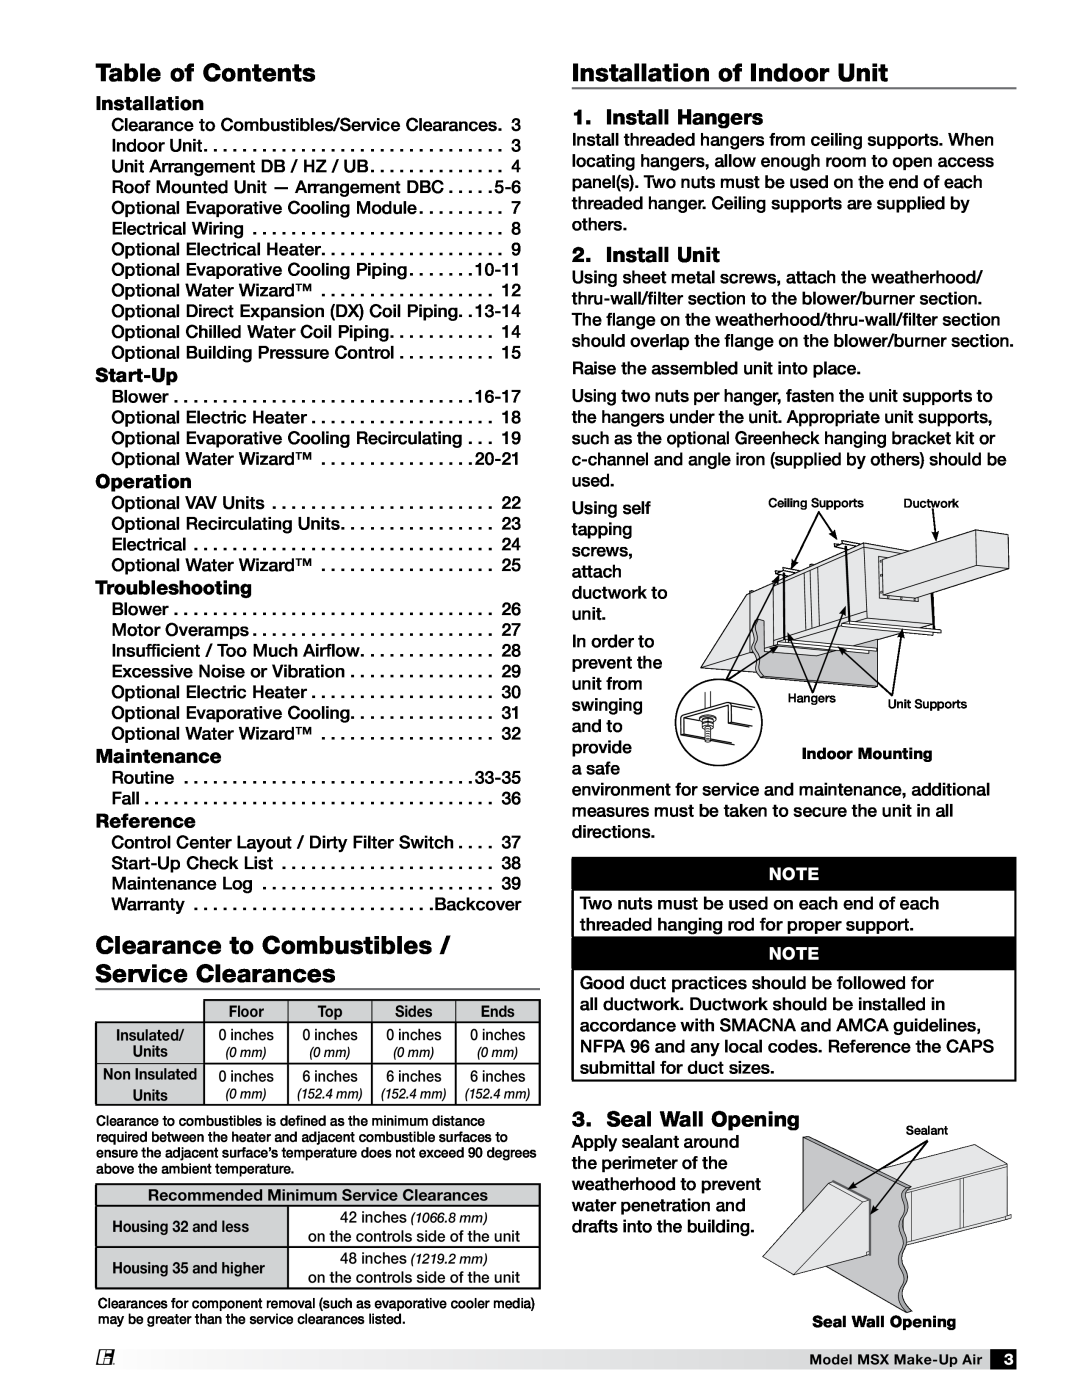 Greenheck Fan 470658 MSX Table of Contents, Clearance to Combustibles / Service Clearances, Installation of Indoor Unit 